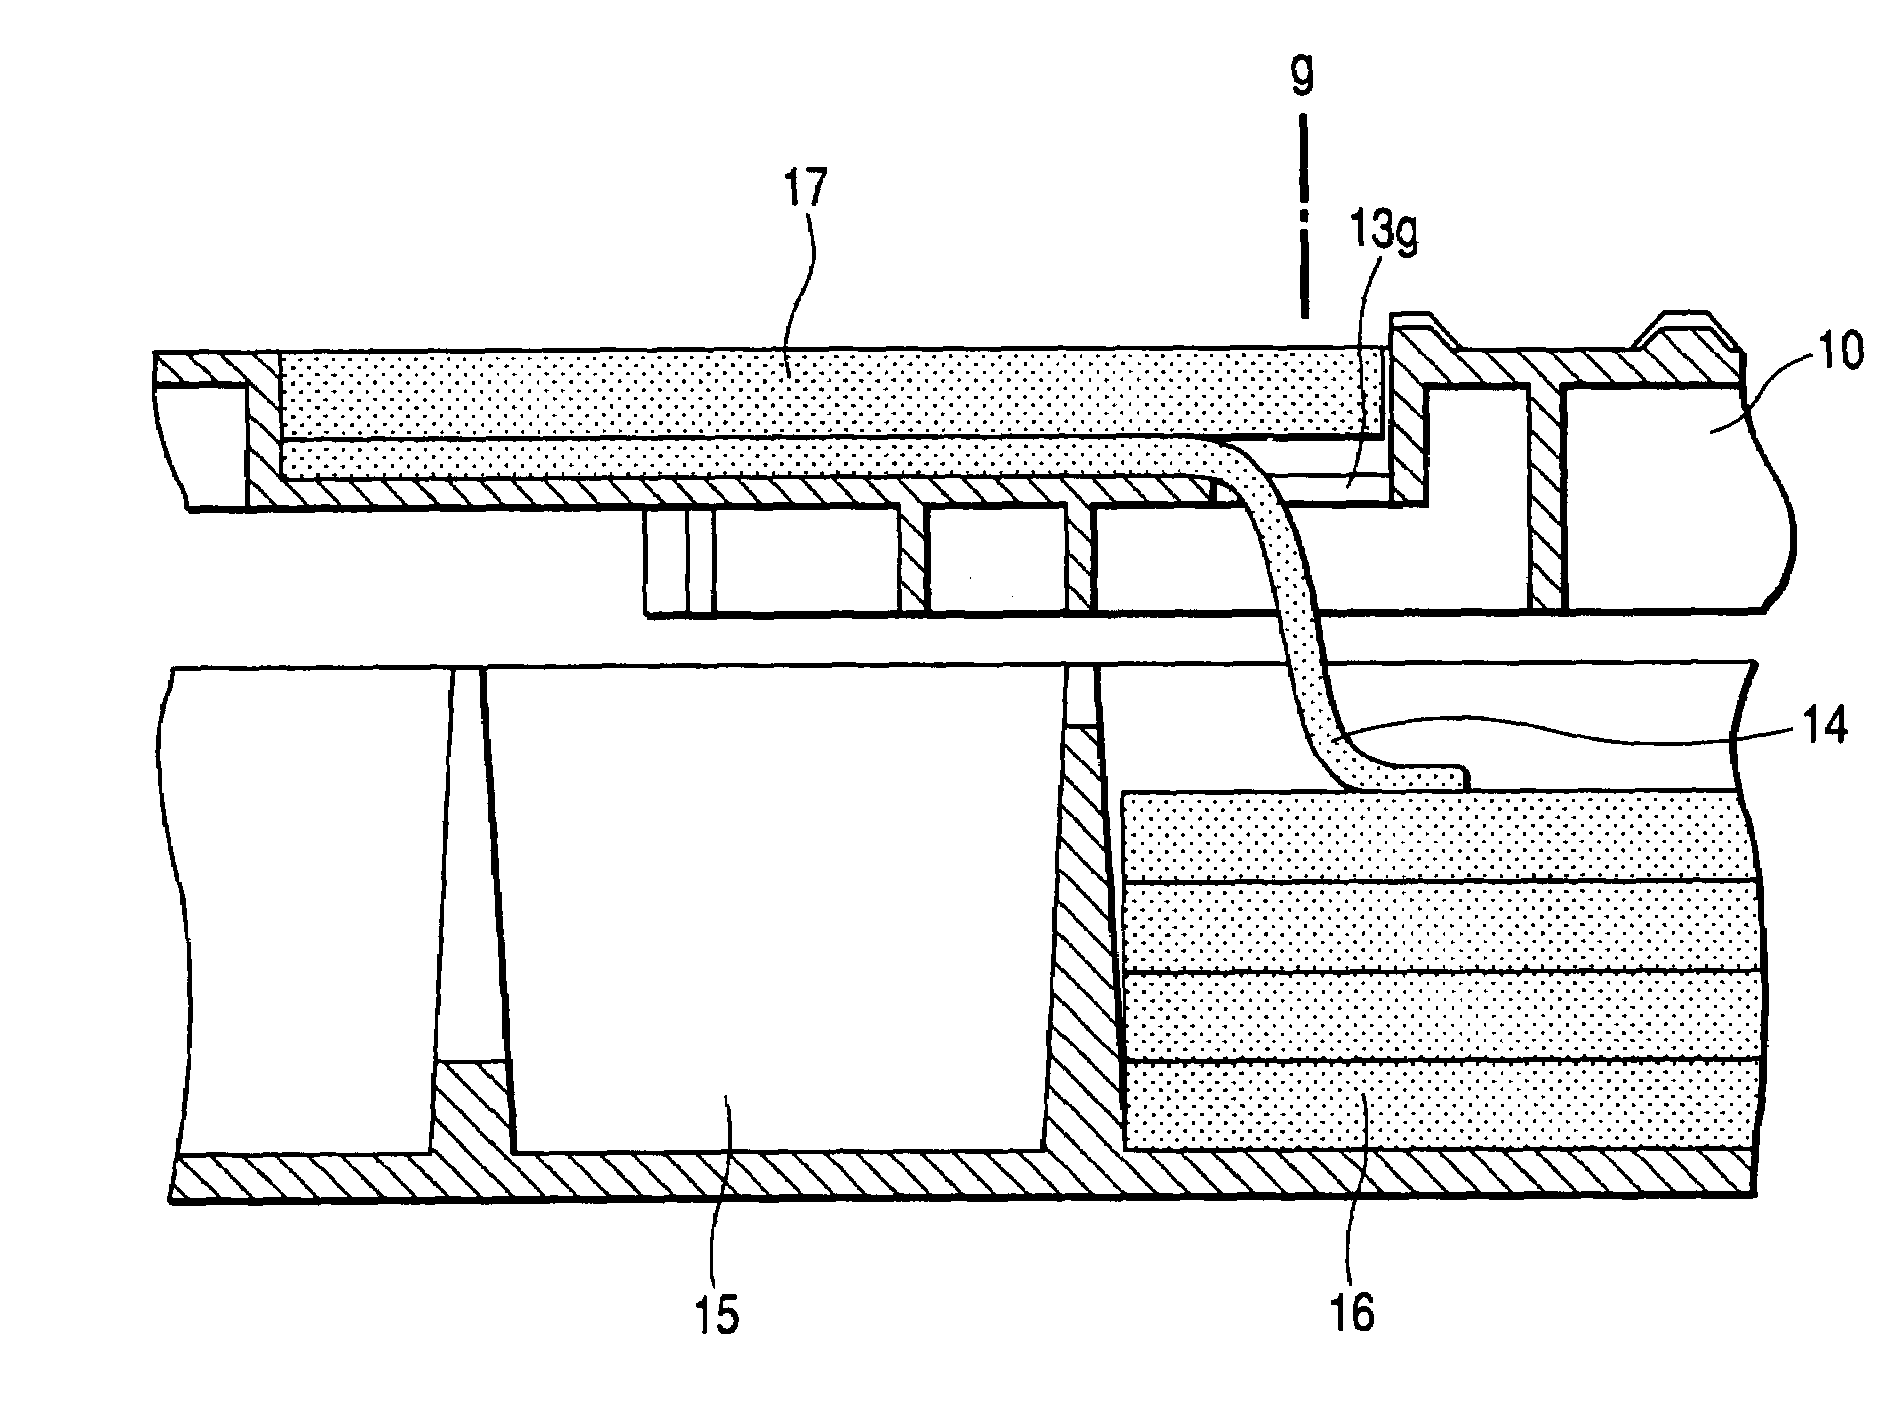 Waste liquid treating device and liquid ejecting apparatus incorporating the same